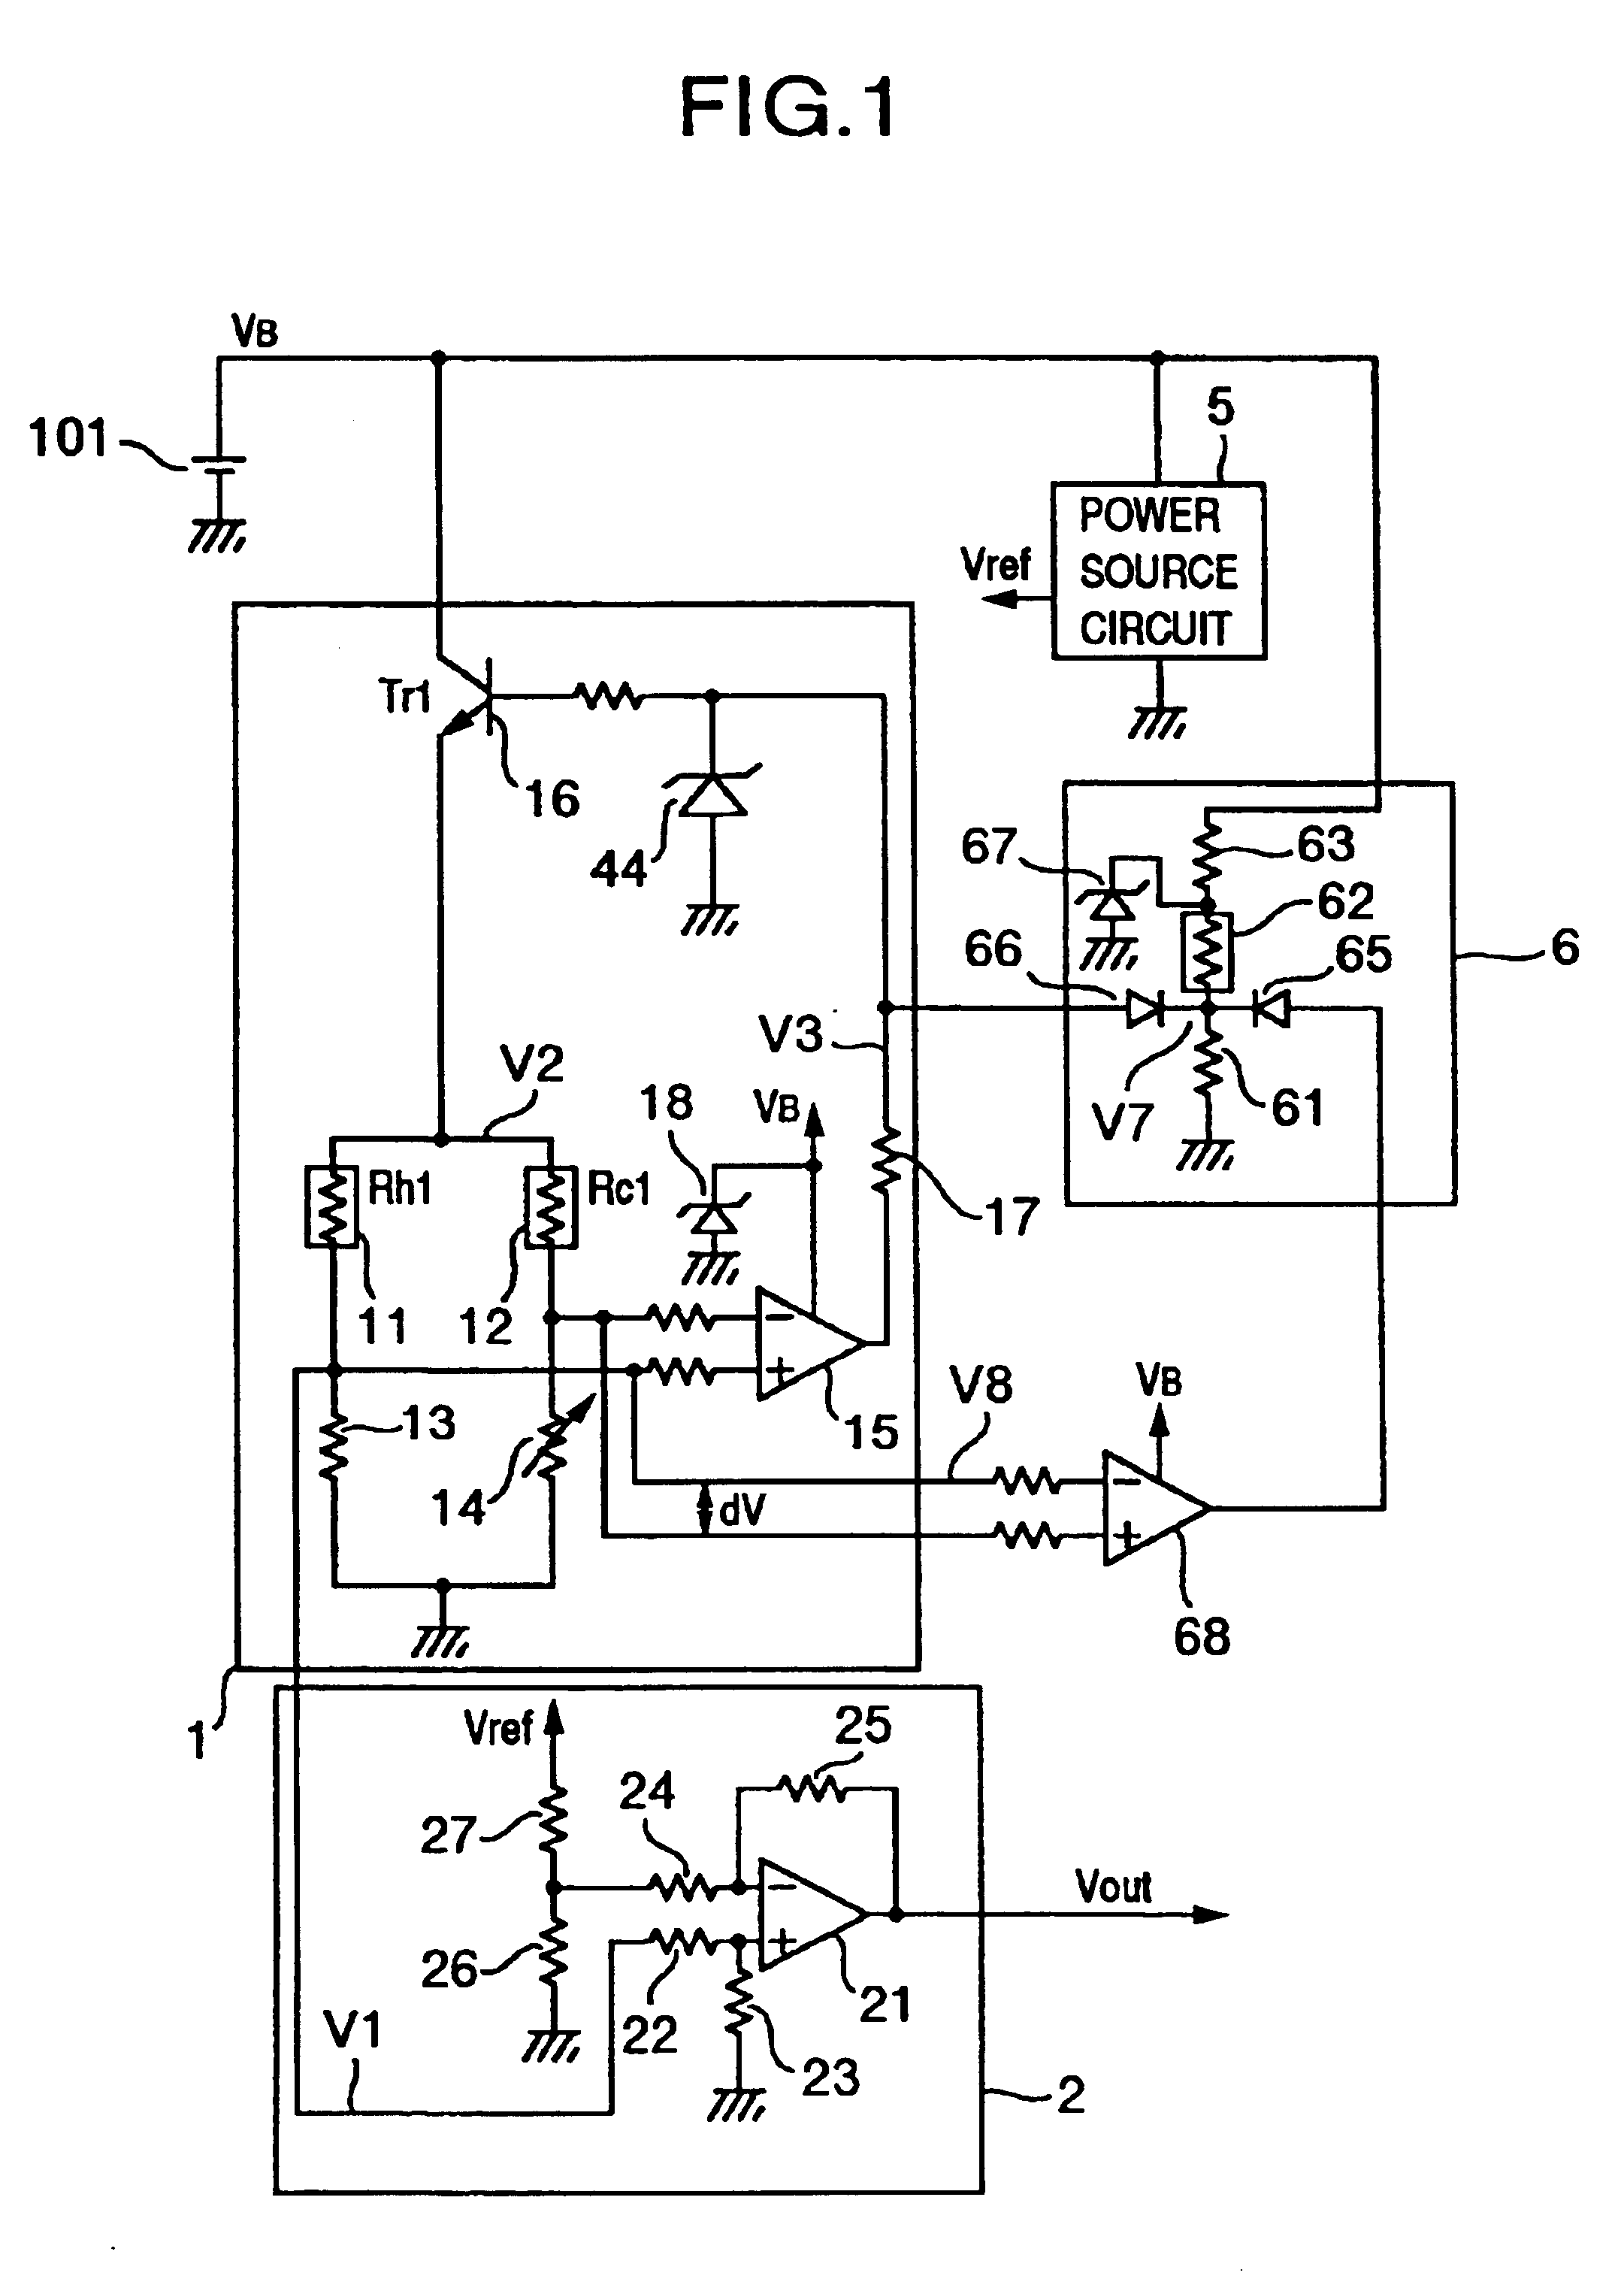 Hot-wire type air flow meter for internal combustion engine